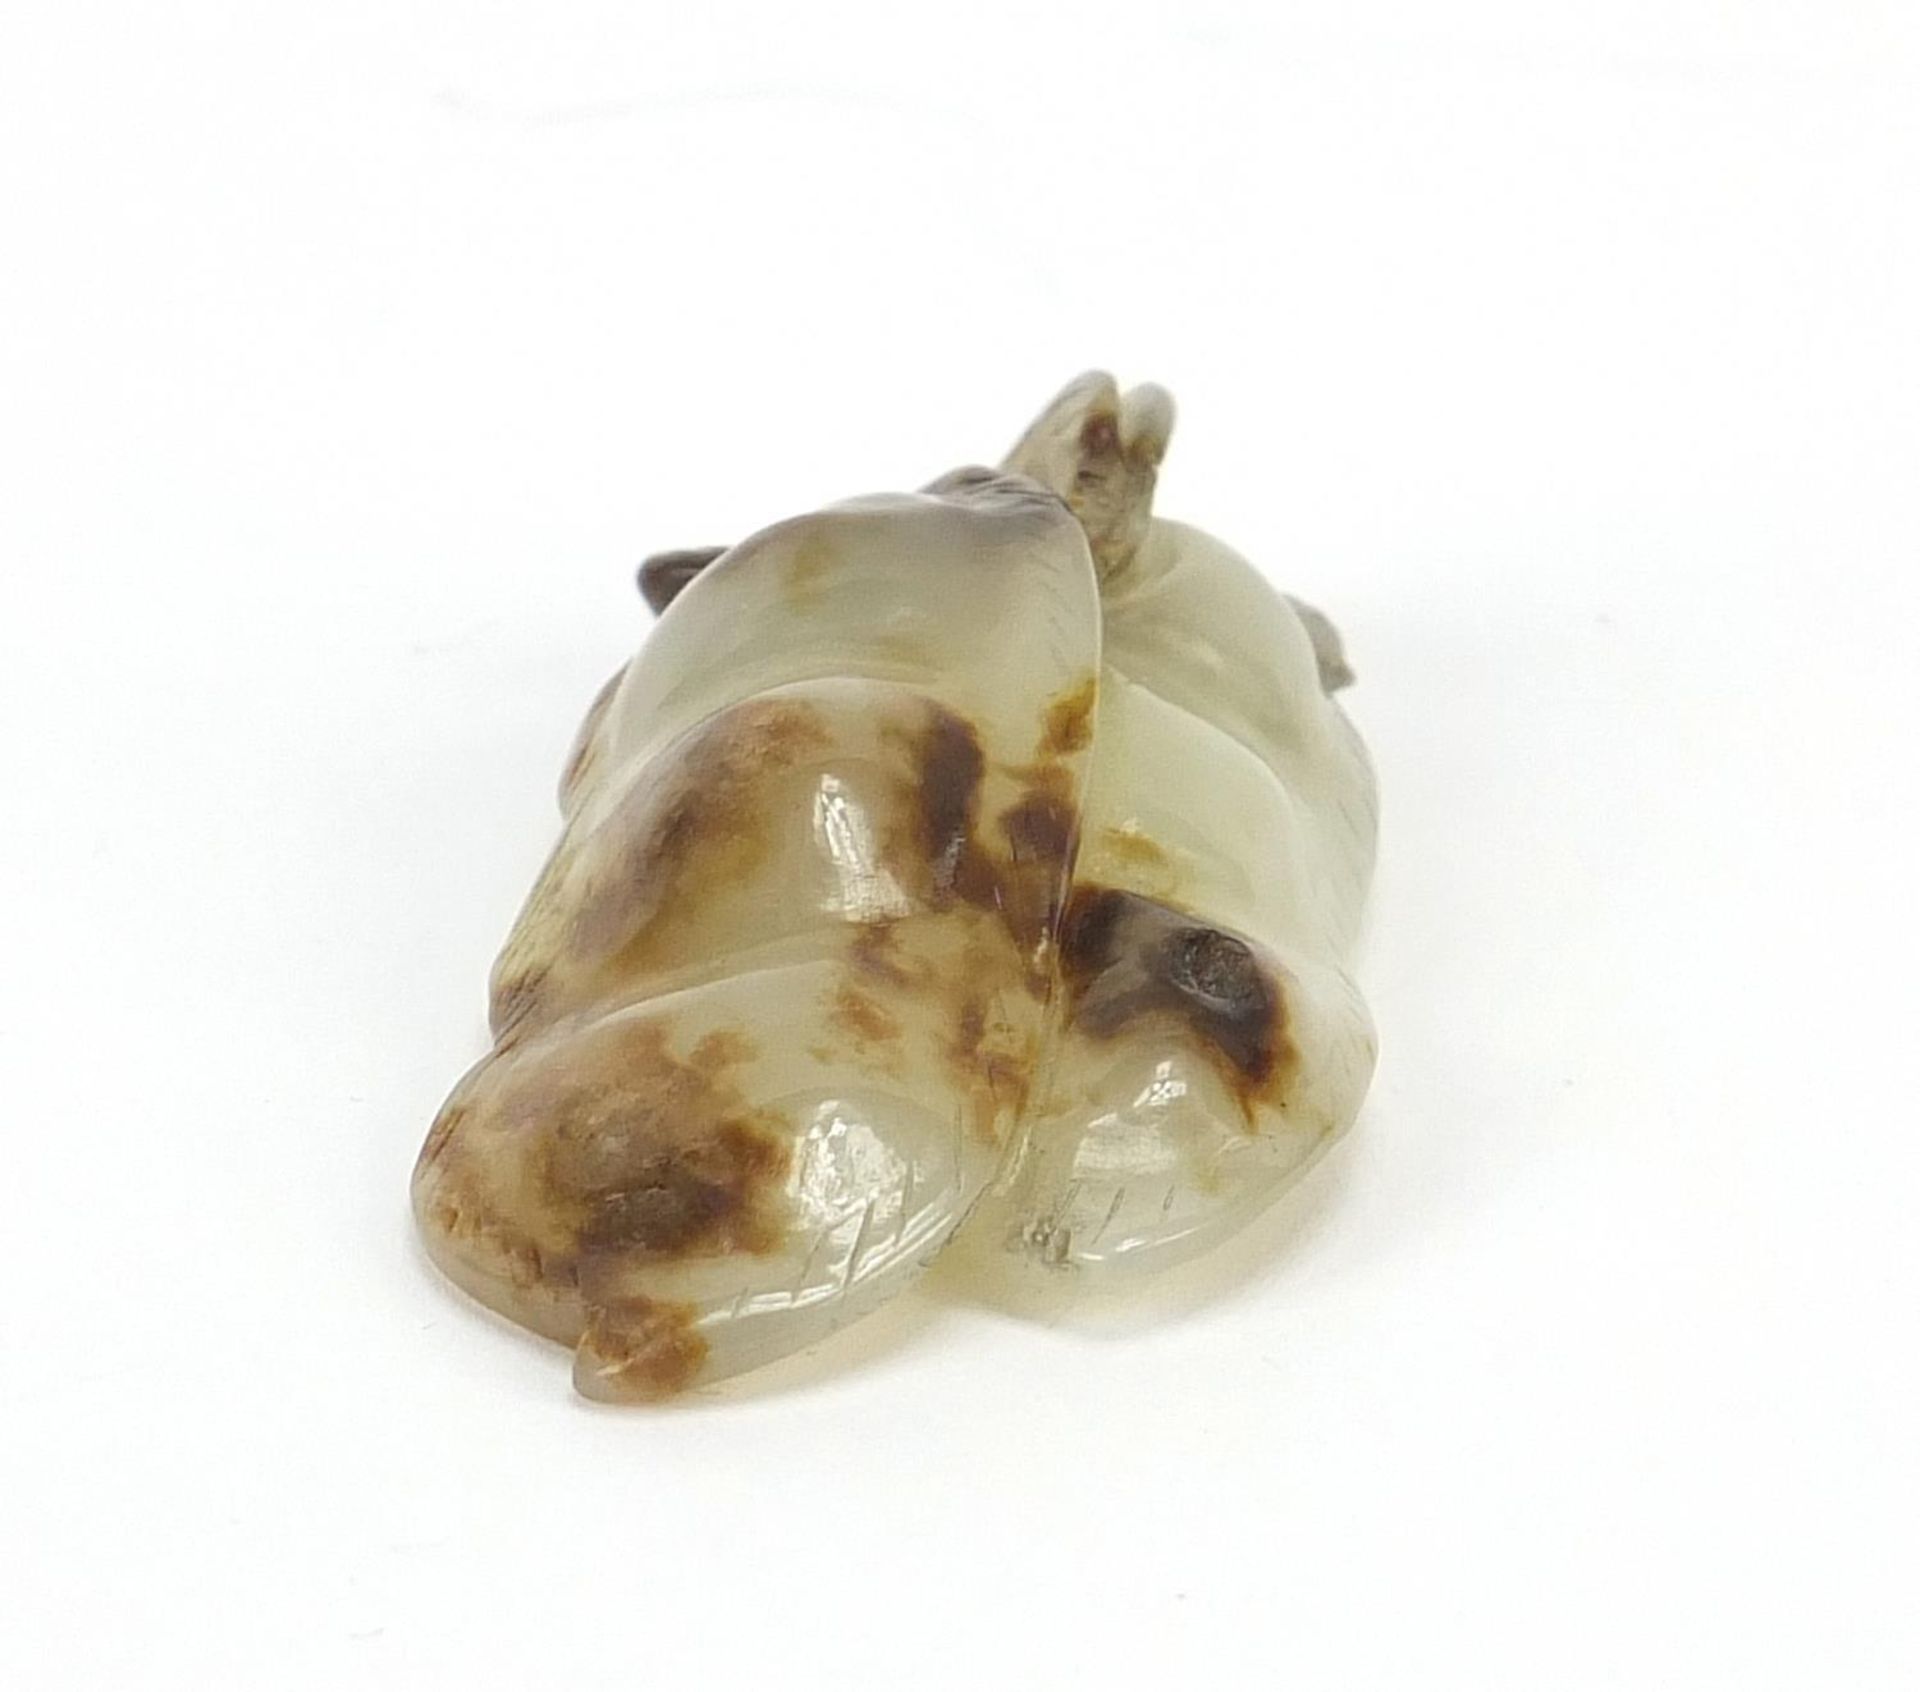 Good Chinese white and russet jade carving of two beans, 5.5cm in length - Image 5 of 7